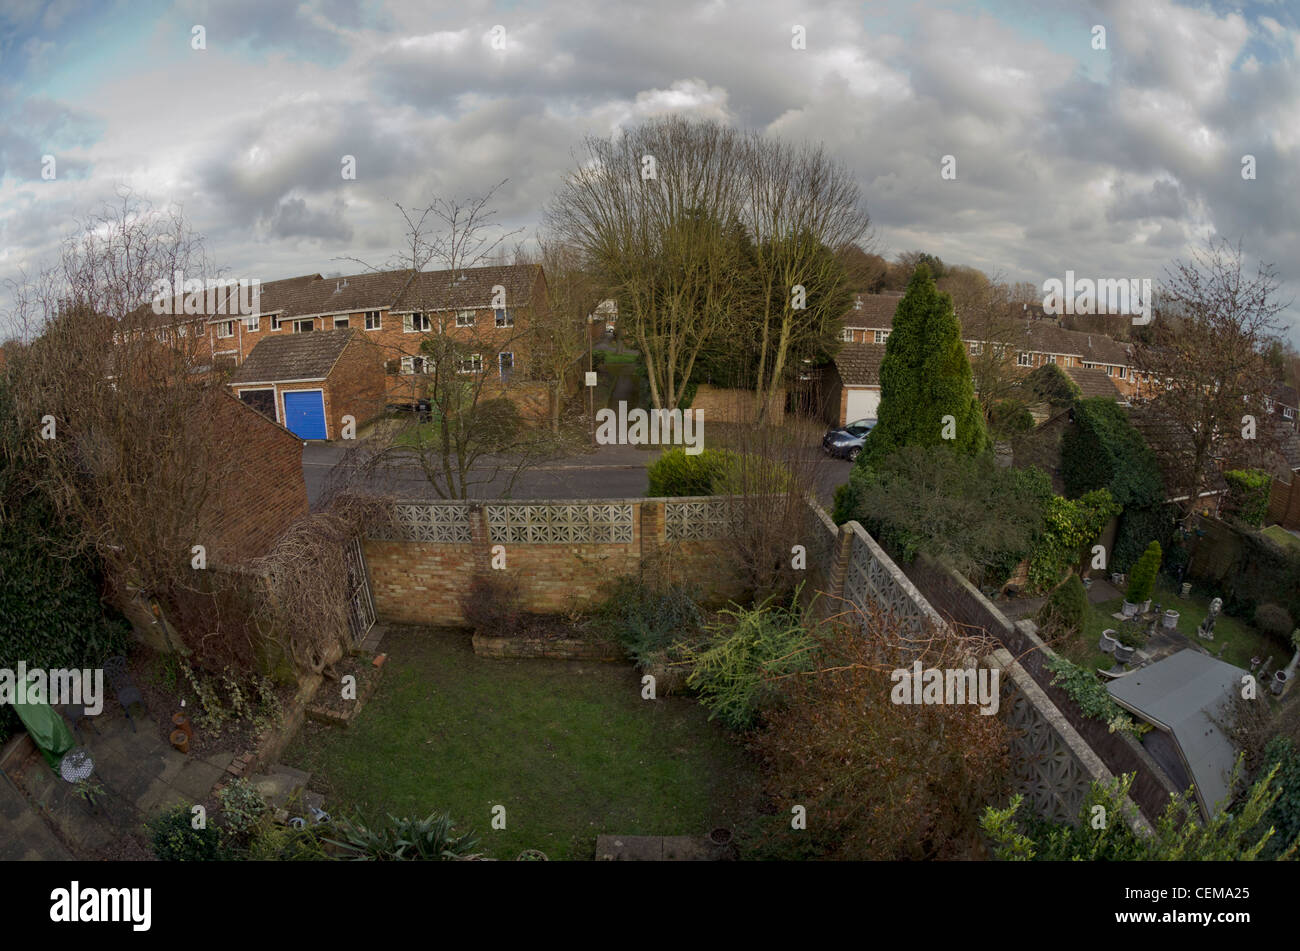 A wide angle view of house and gardens within a housing estate Stock Photo